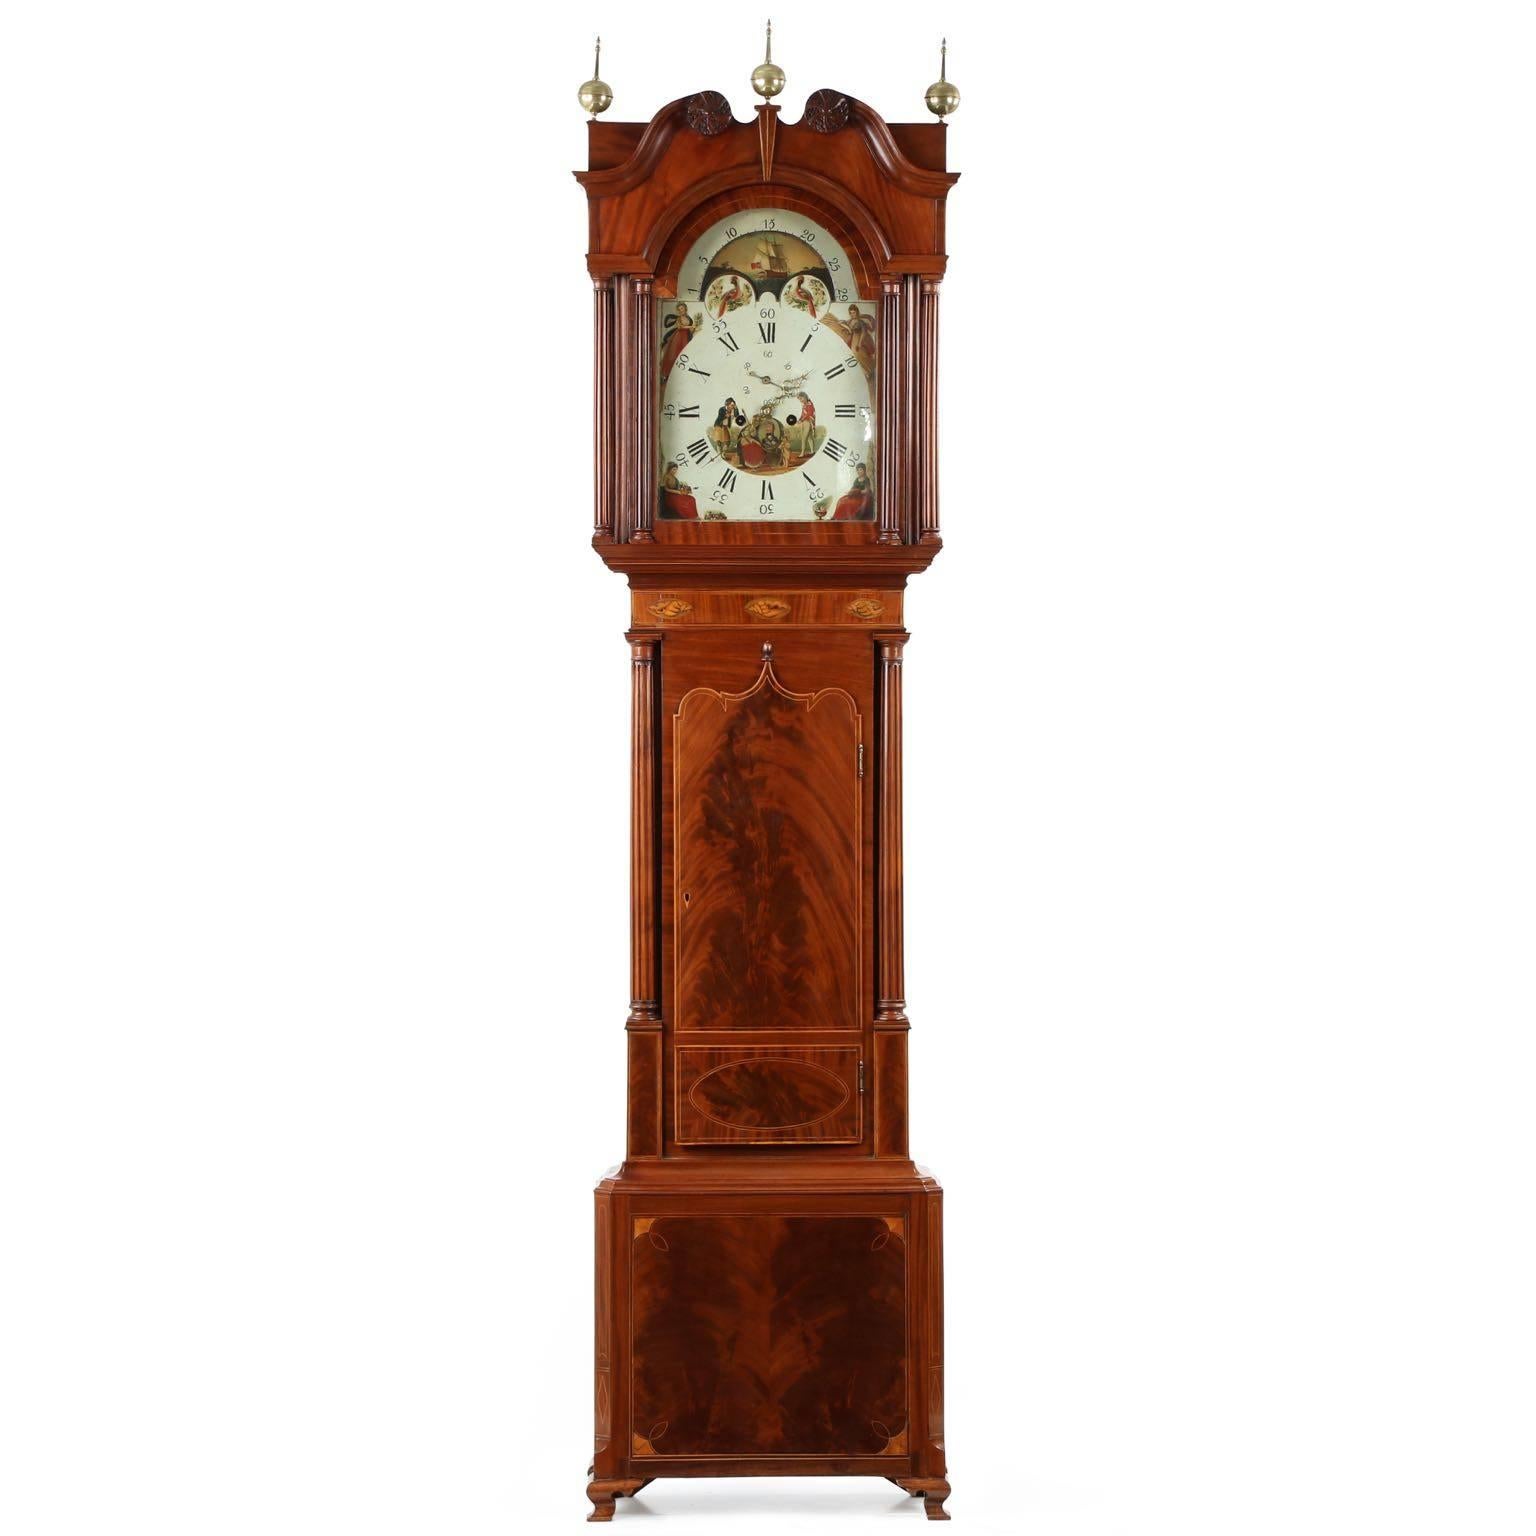 An intricately detailed work, this fine English Georgian tall case clock crafted during the first years of the 19th Century is distinguished by it's extensive satinwood stringer inlays - a work strongly influenced by the Neoclassicism of the period,